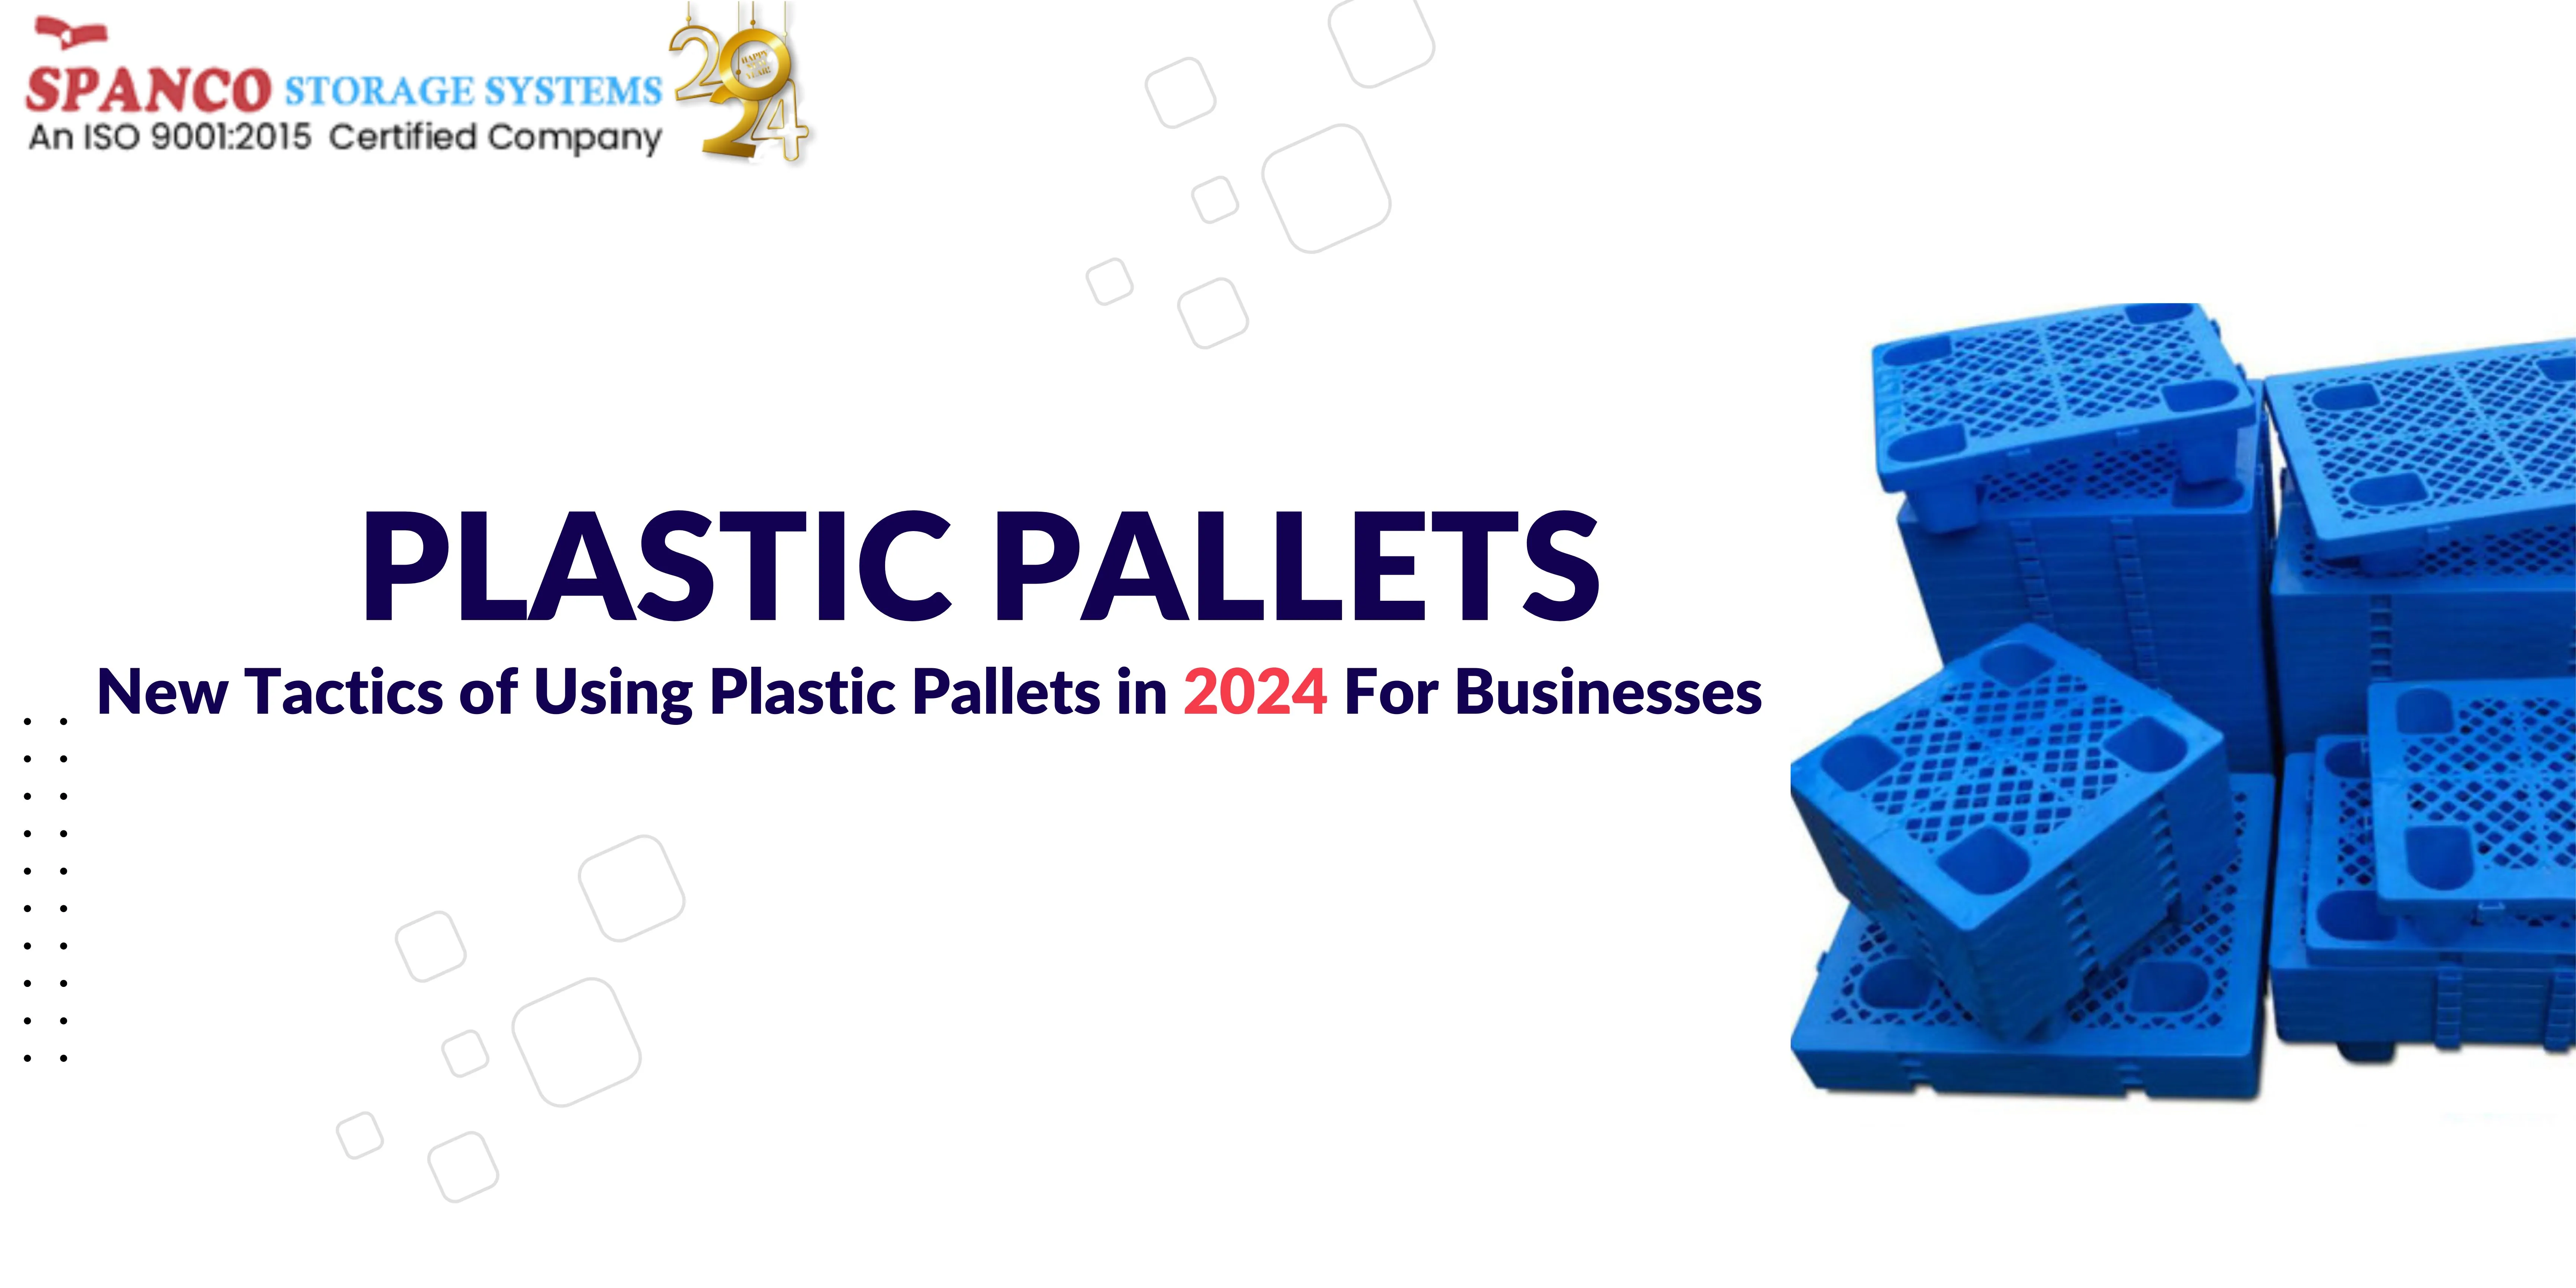 New Tactics of Using Plastic Pallets in 2024 For Businesses